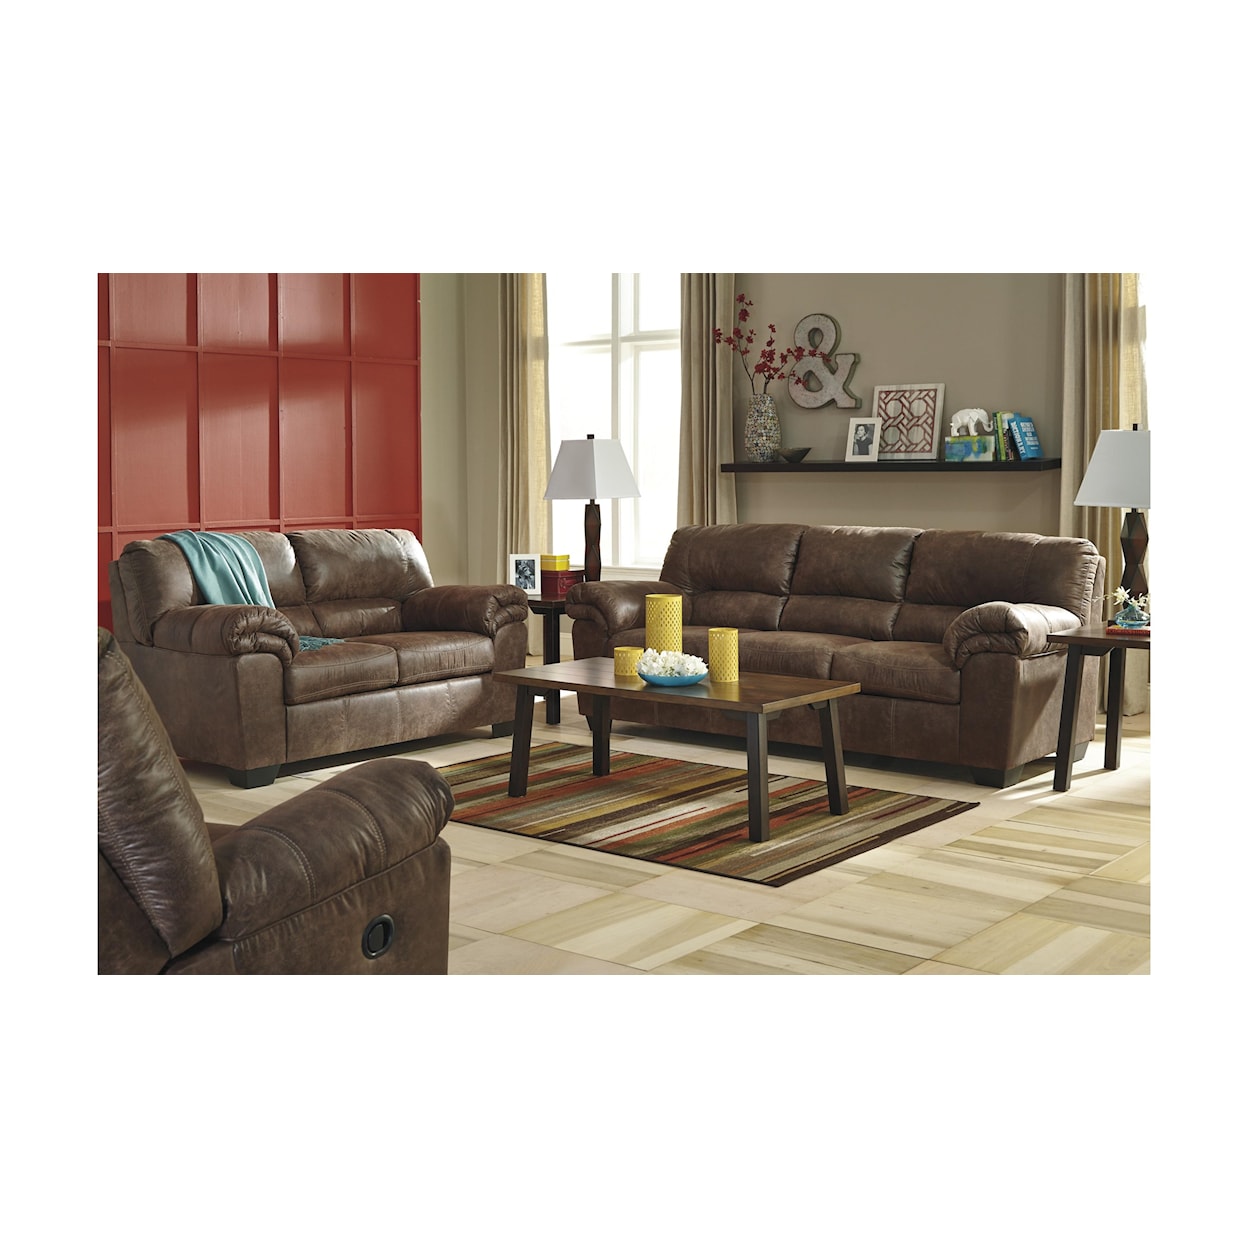 StyleLine LOVEN Sofa, Loveseat, and Recliner